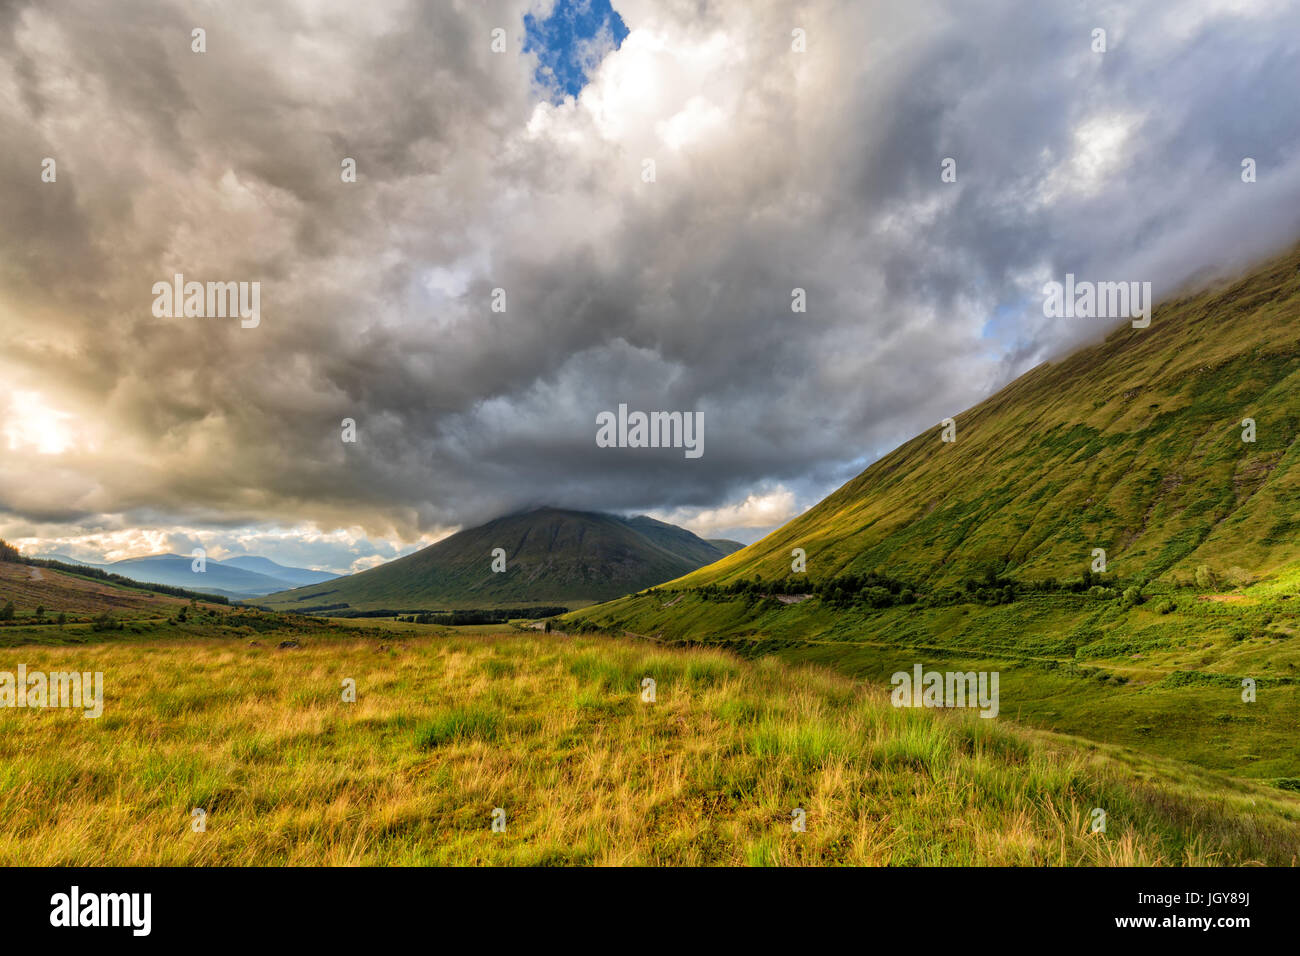 Verdent grass in a valley with Beinn Dorain and Beinn Odhar mountains in the background. Stock Photo